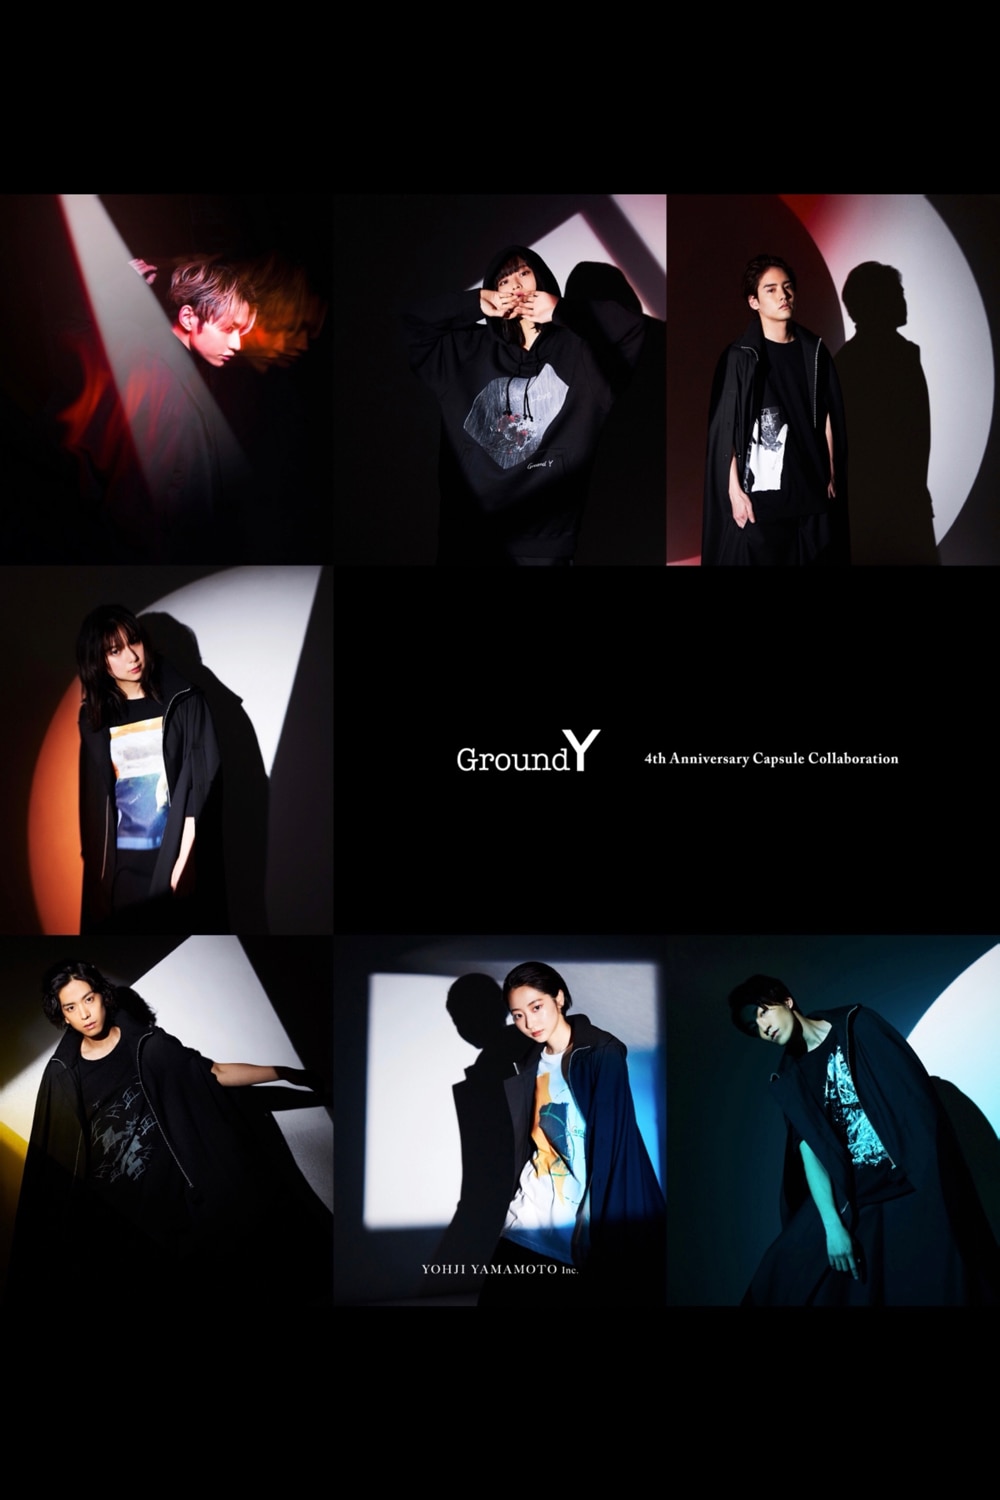 Ground Y 4th Anniversary Capsule Collaboration